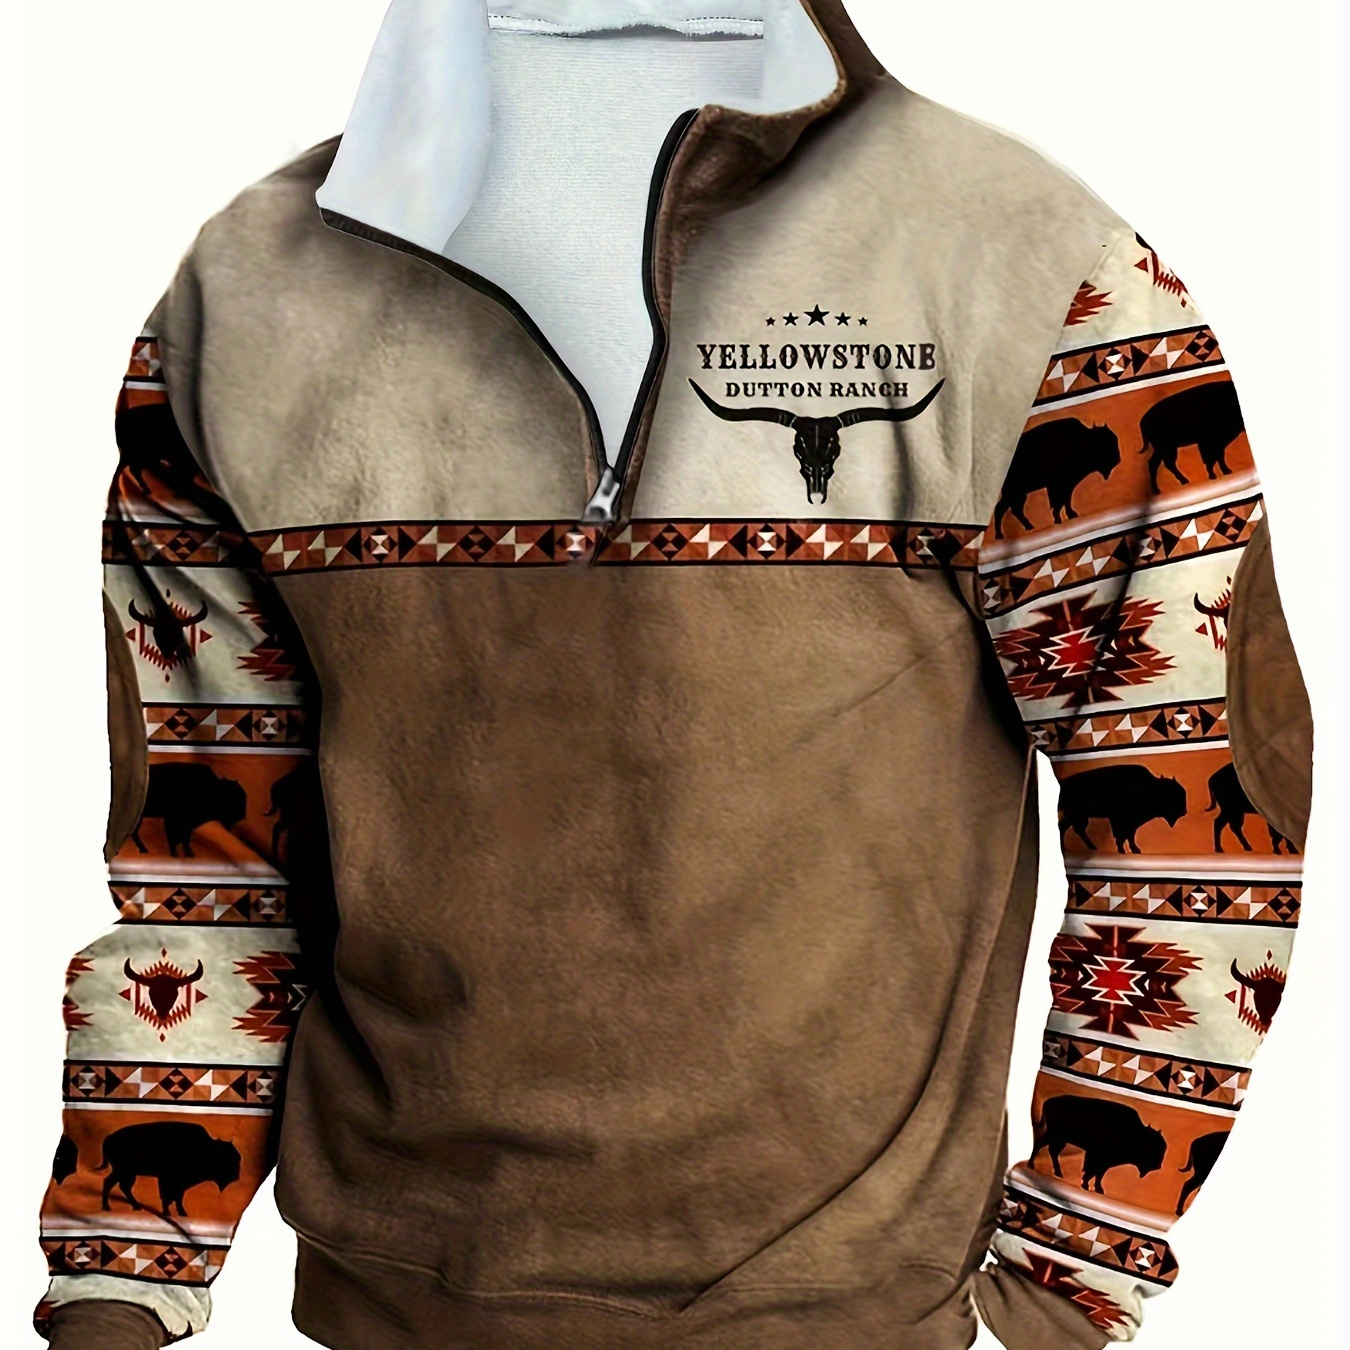 

Men's Ethnic Pattern Design Long Sleeve Thermal Sweatshirt With Half-zip Collar, Autumn/winter Warm Pullover For Casual Daily Wear